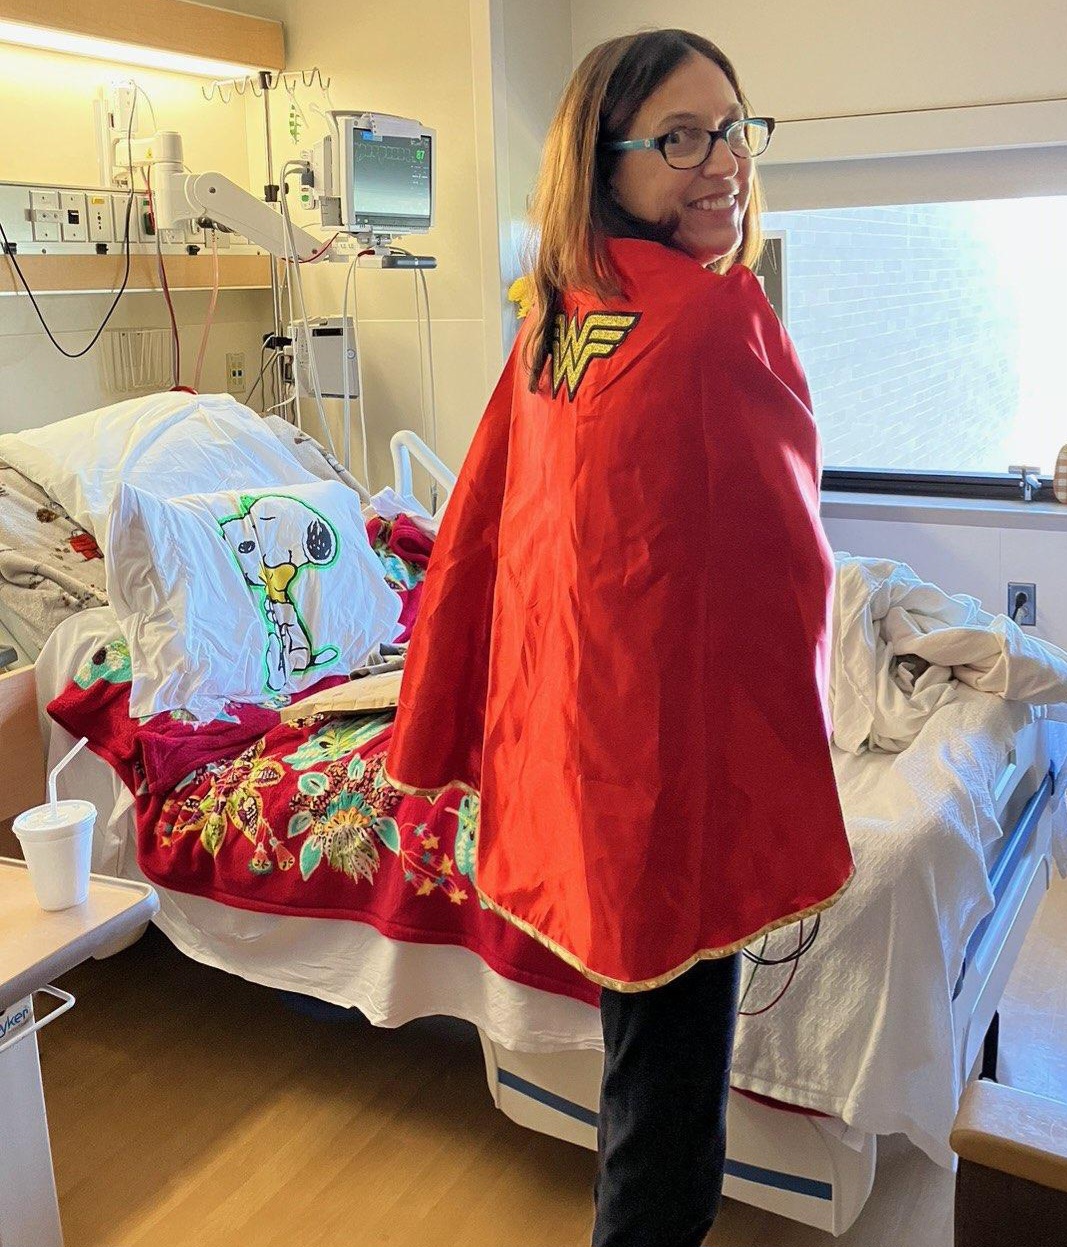 Sherry showing off her Wonder Woman cape in her hospital room